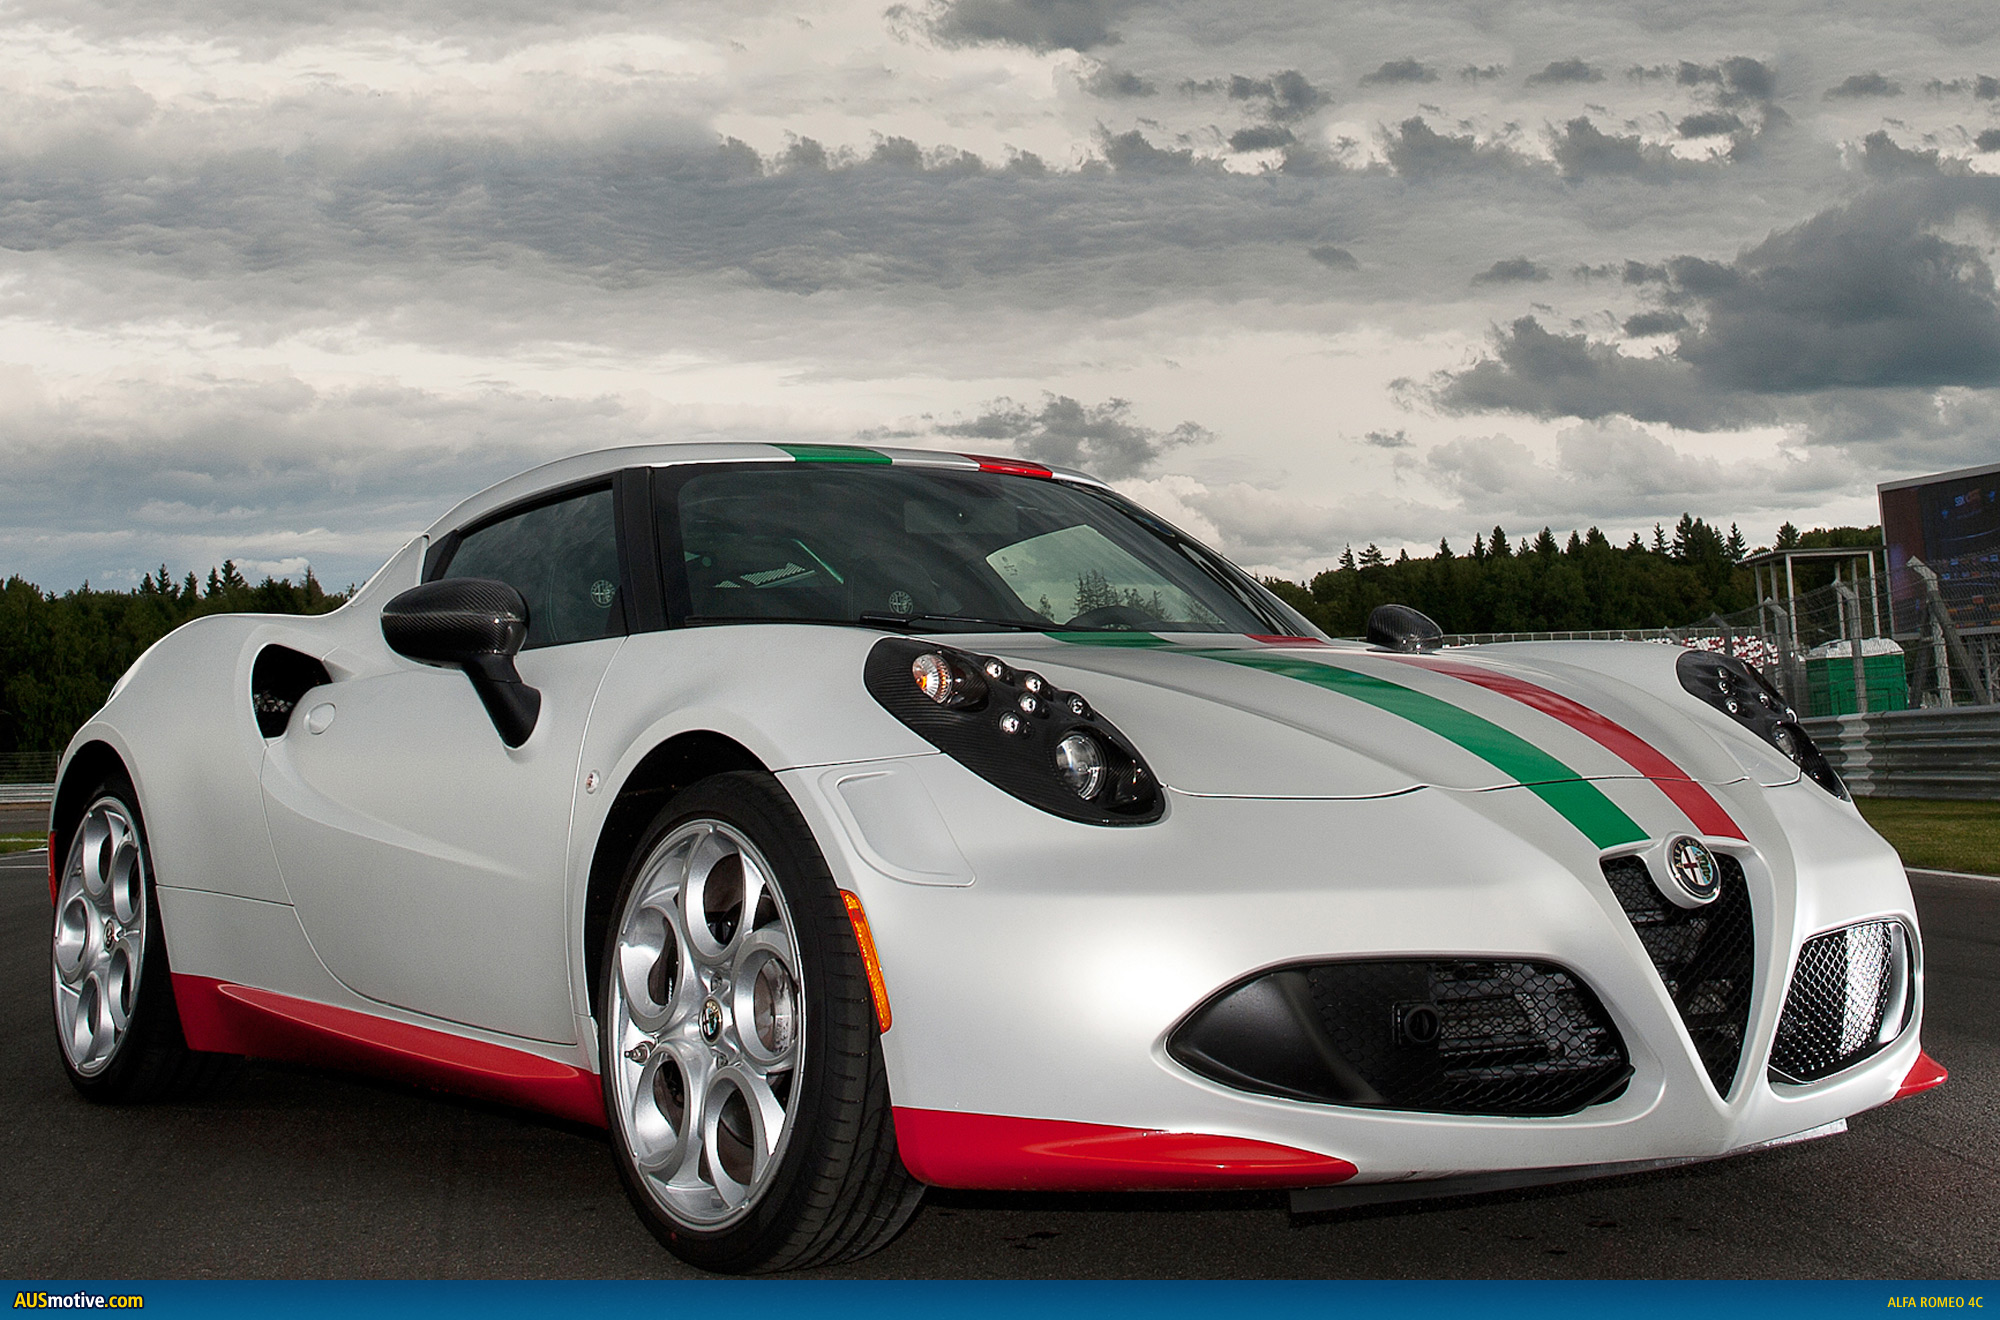 The Alfa Romeo 4C has been named as the official safety car of the FIM 